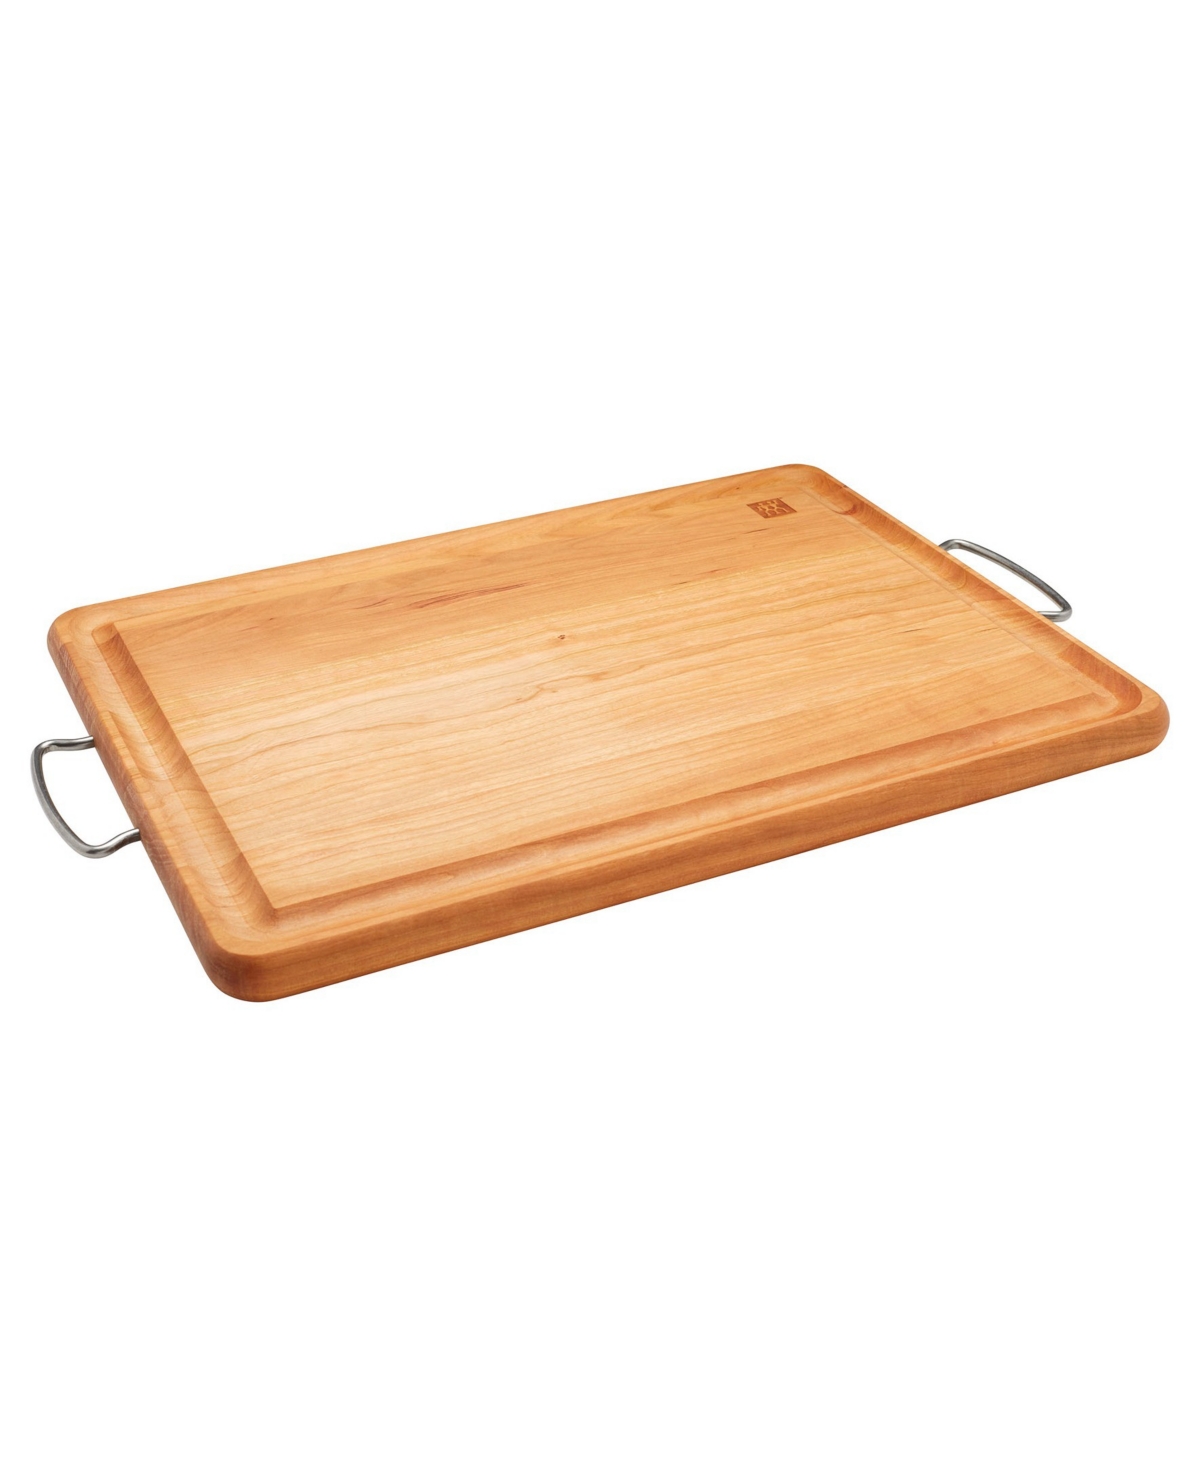 Zwilling Cherry Wood Carving Board With Handles In Natural